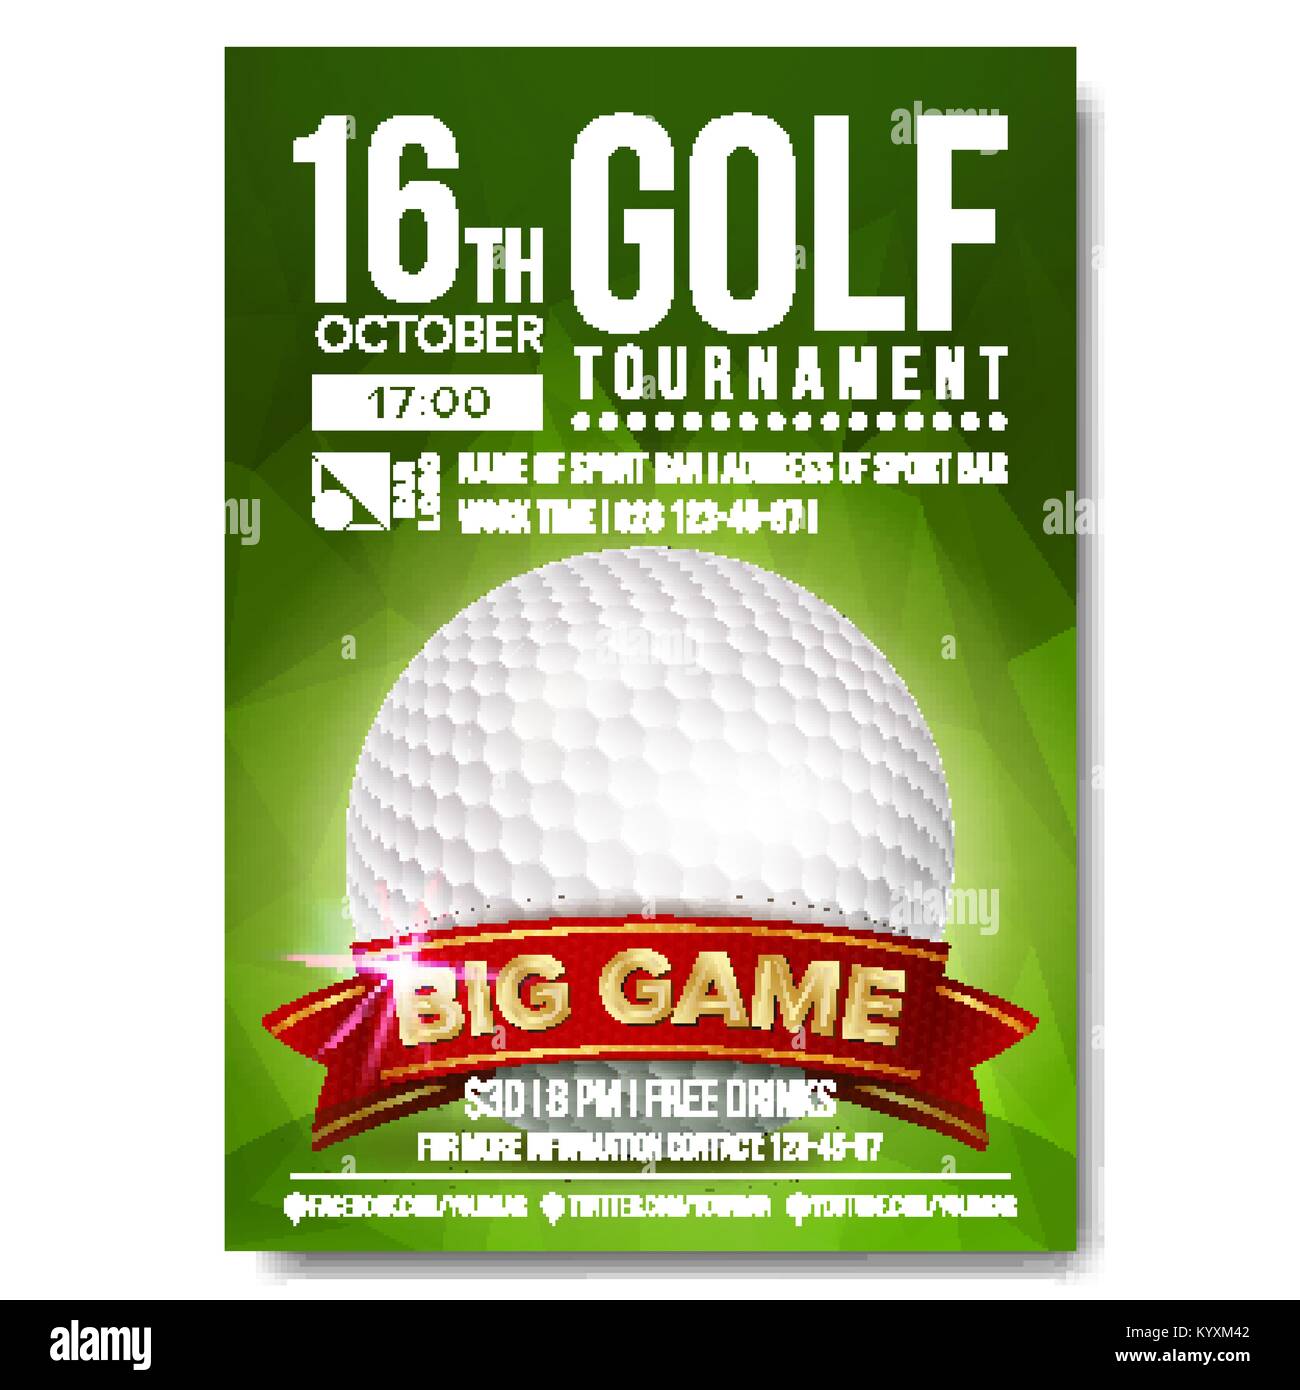 Template Golf Tournament Scramble Invitation Stockfotos und With Regard To Golf Outing Flyer Template